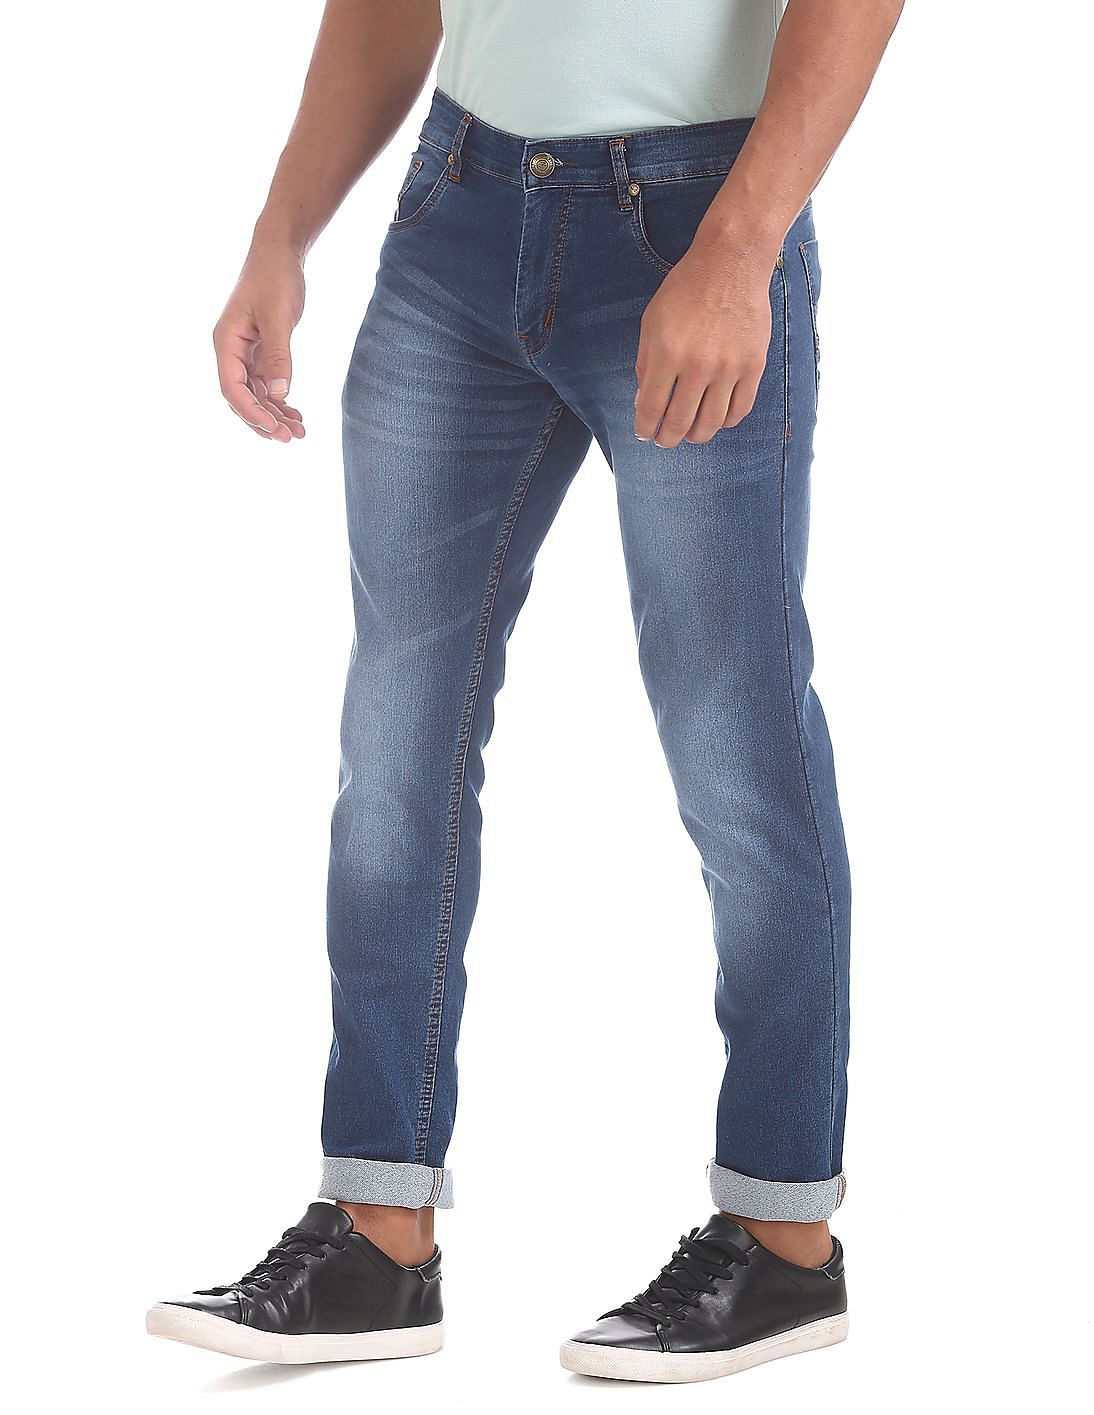 Exciting Offer | Men's Jeans Under Rs.999 Only